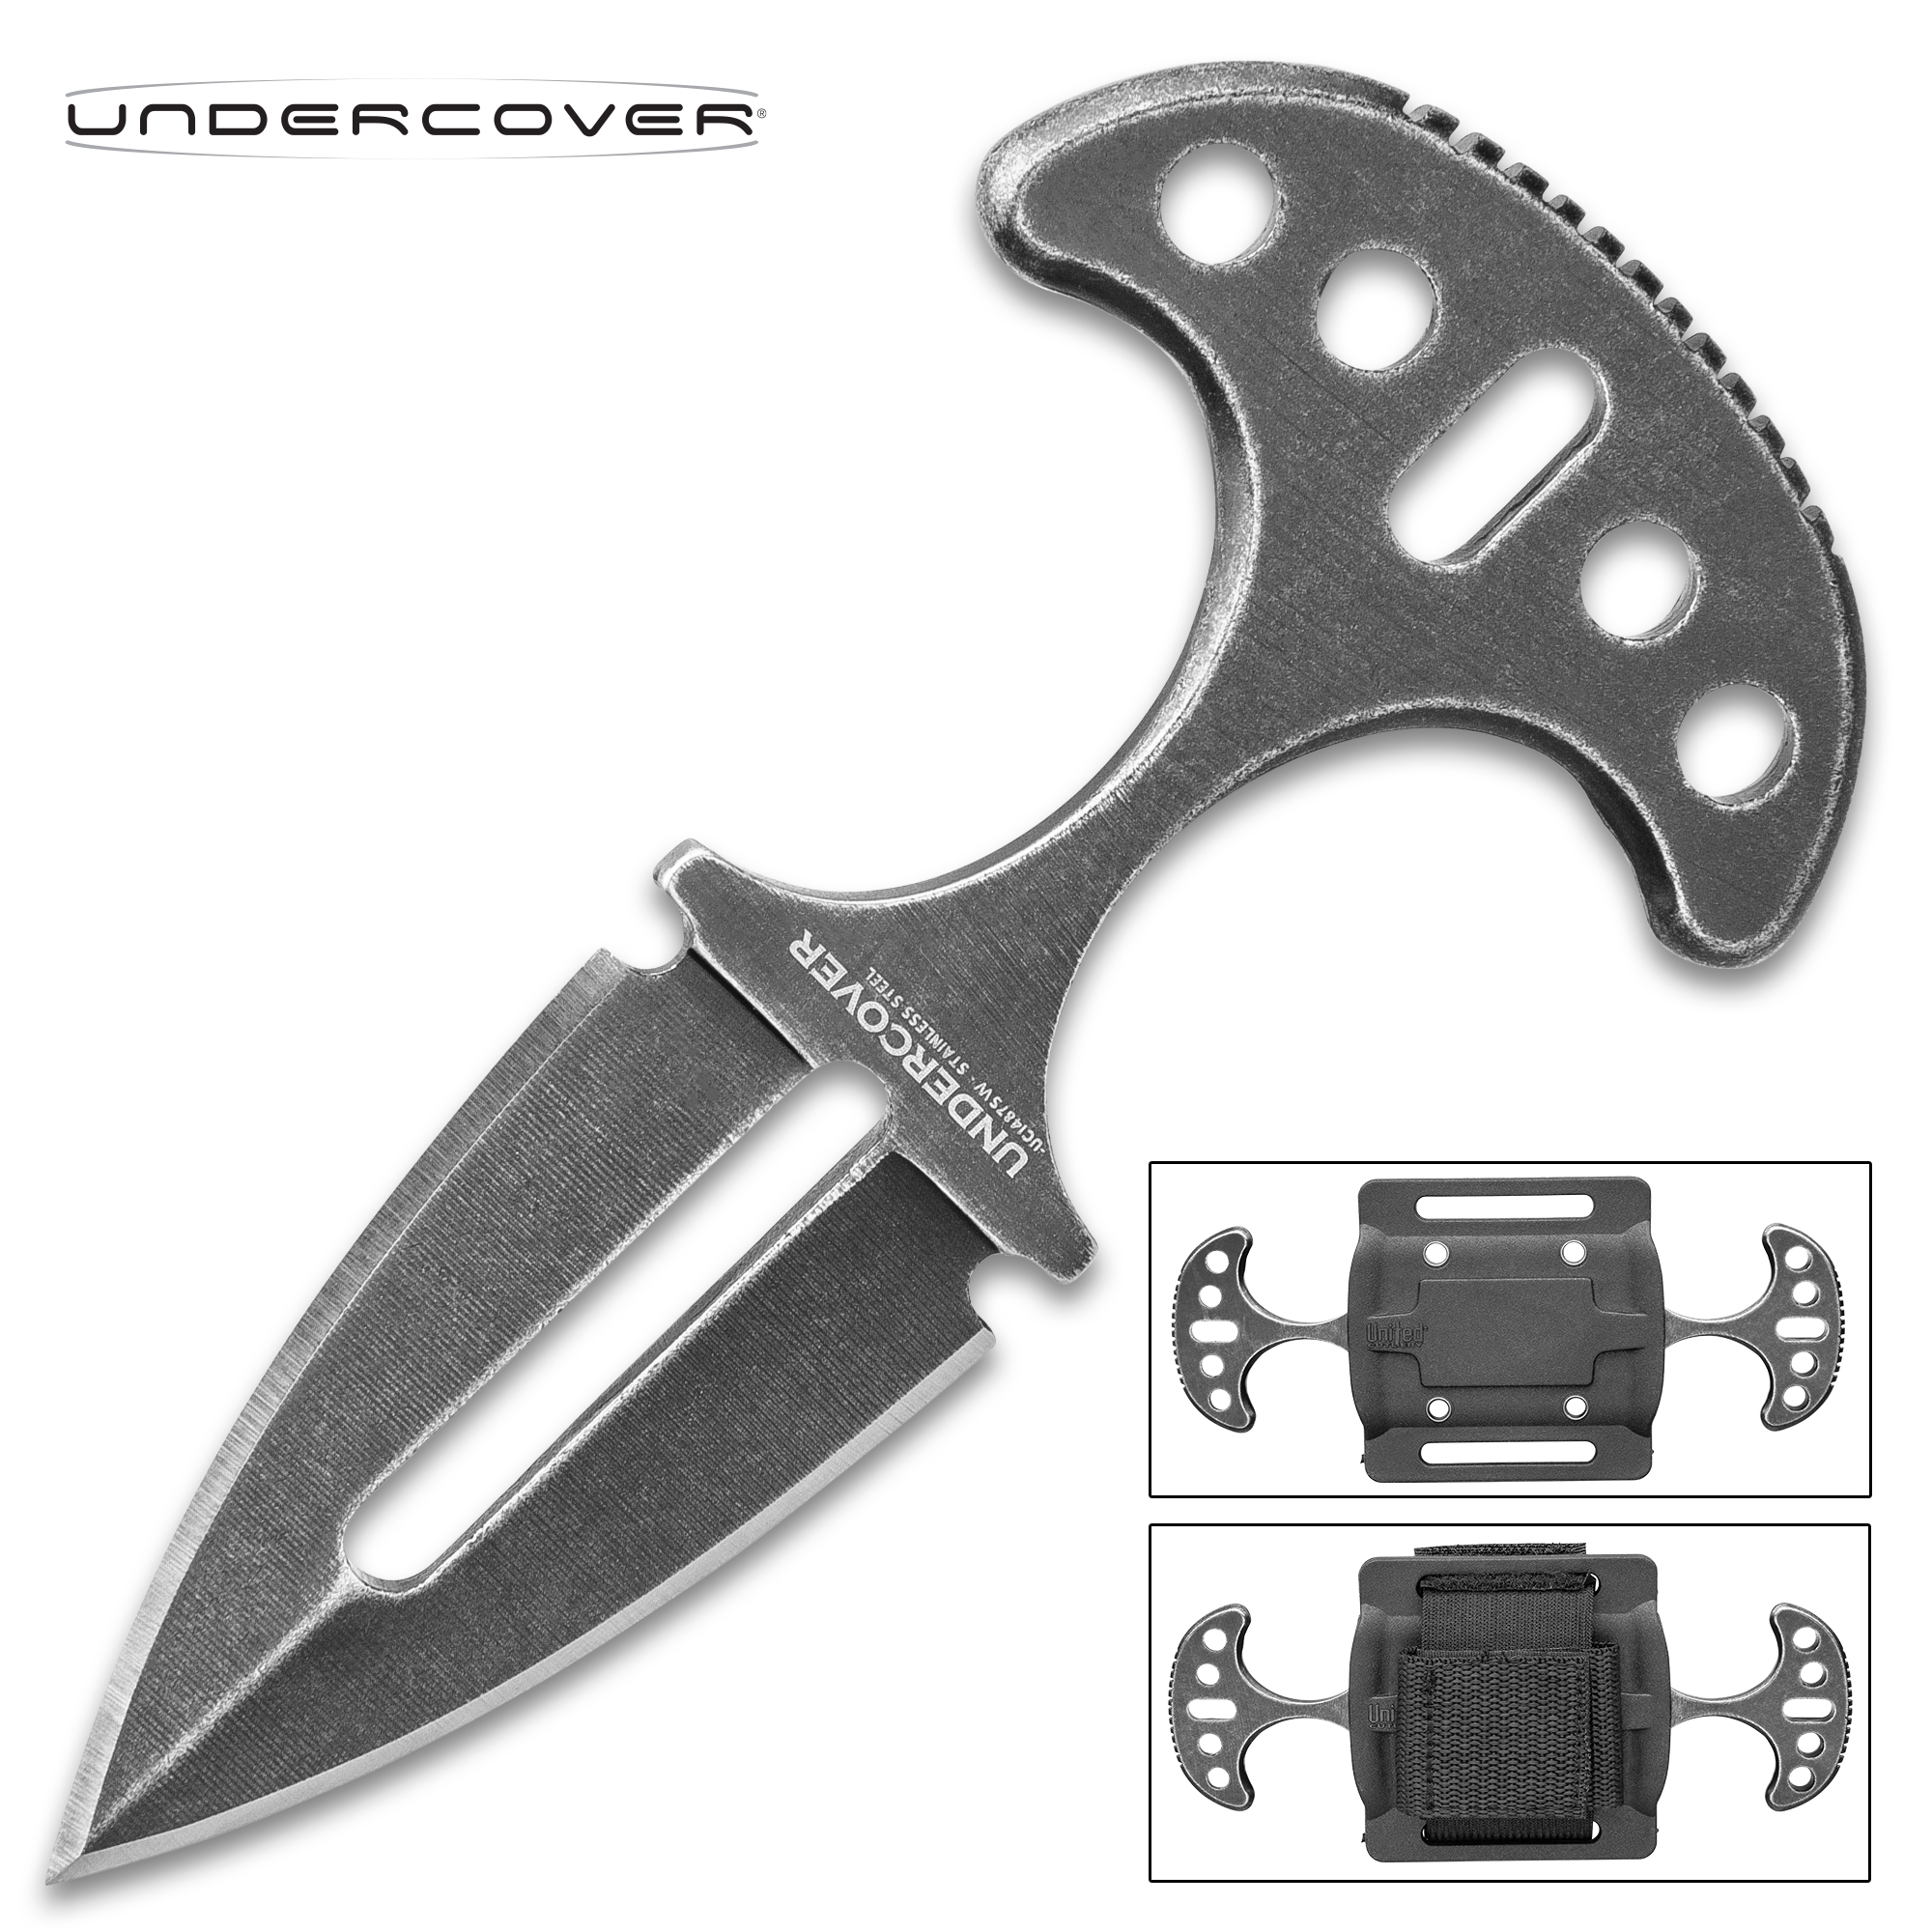 Offering a compact size and discreet carry option, the United Cutlery Under...